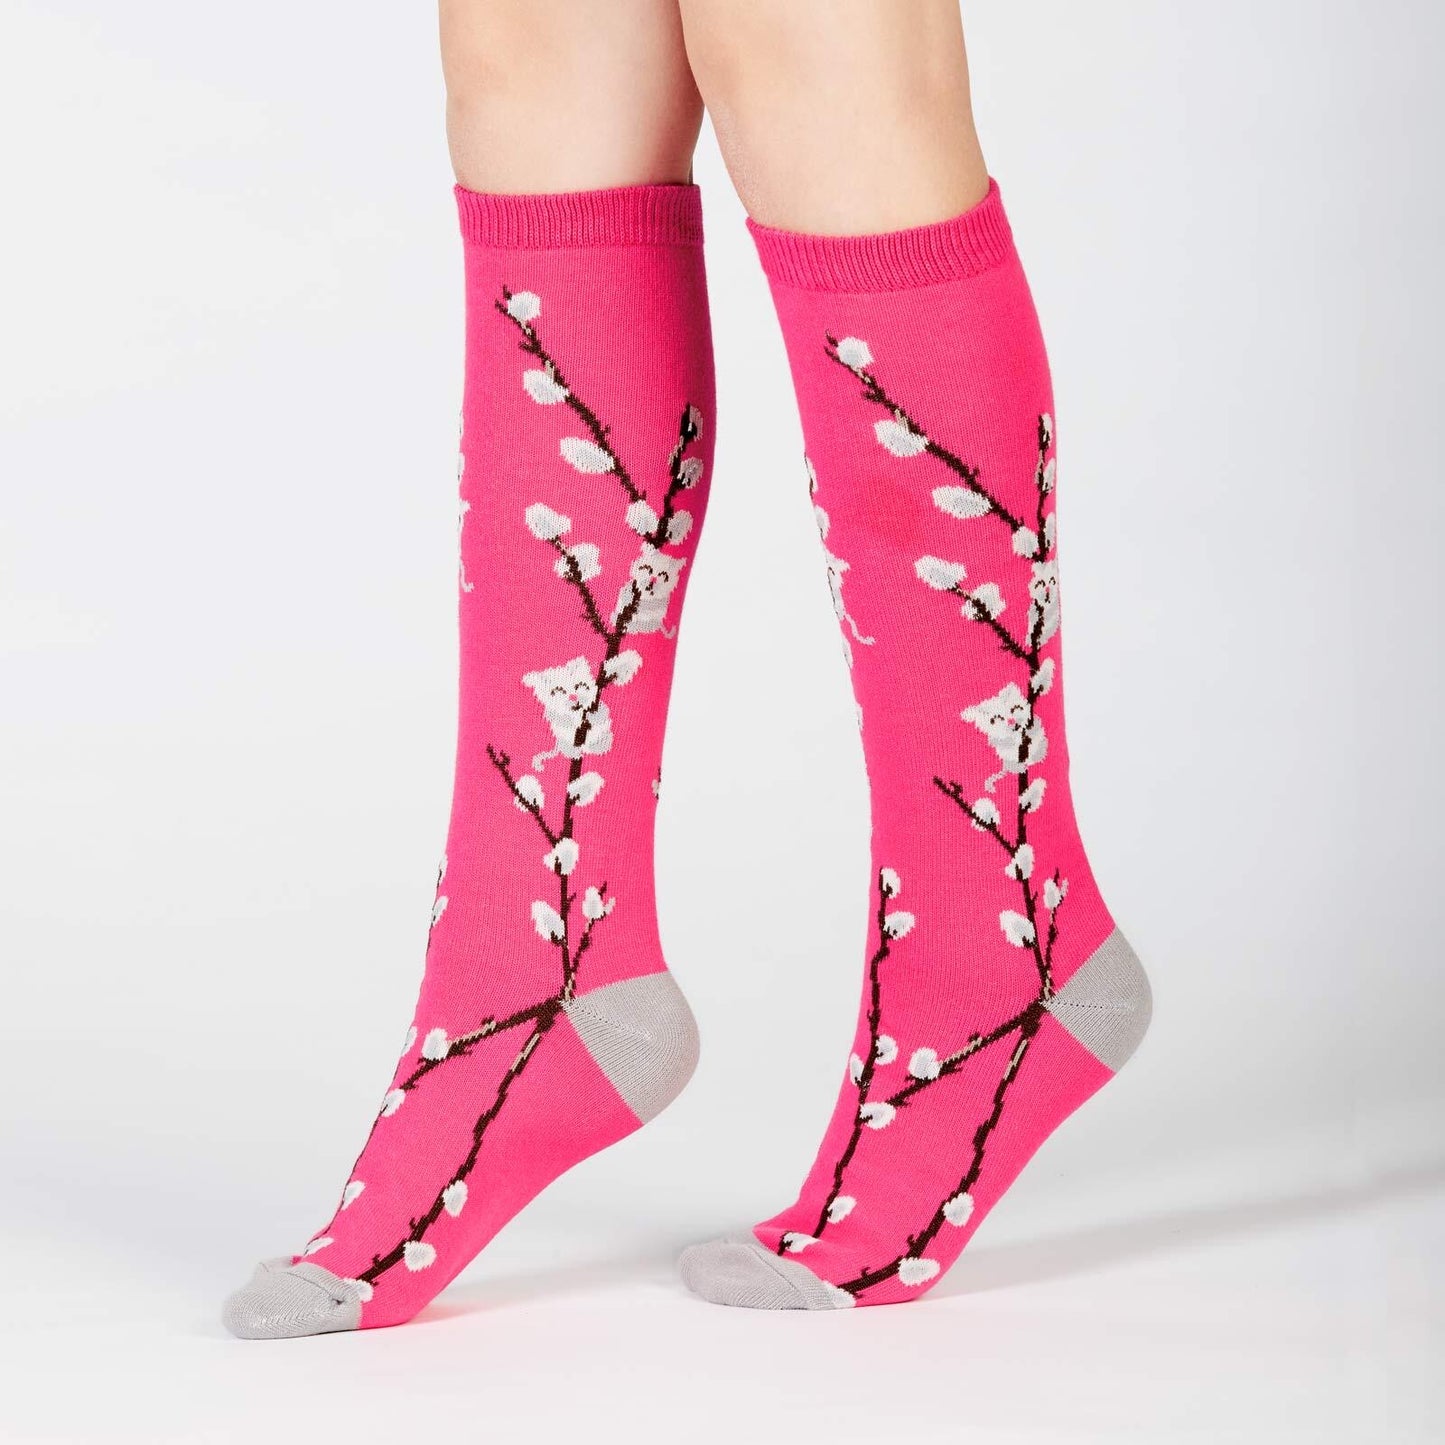 Youth Knee High Sock (ages 3-6) Various Designs